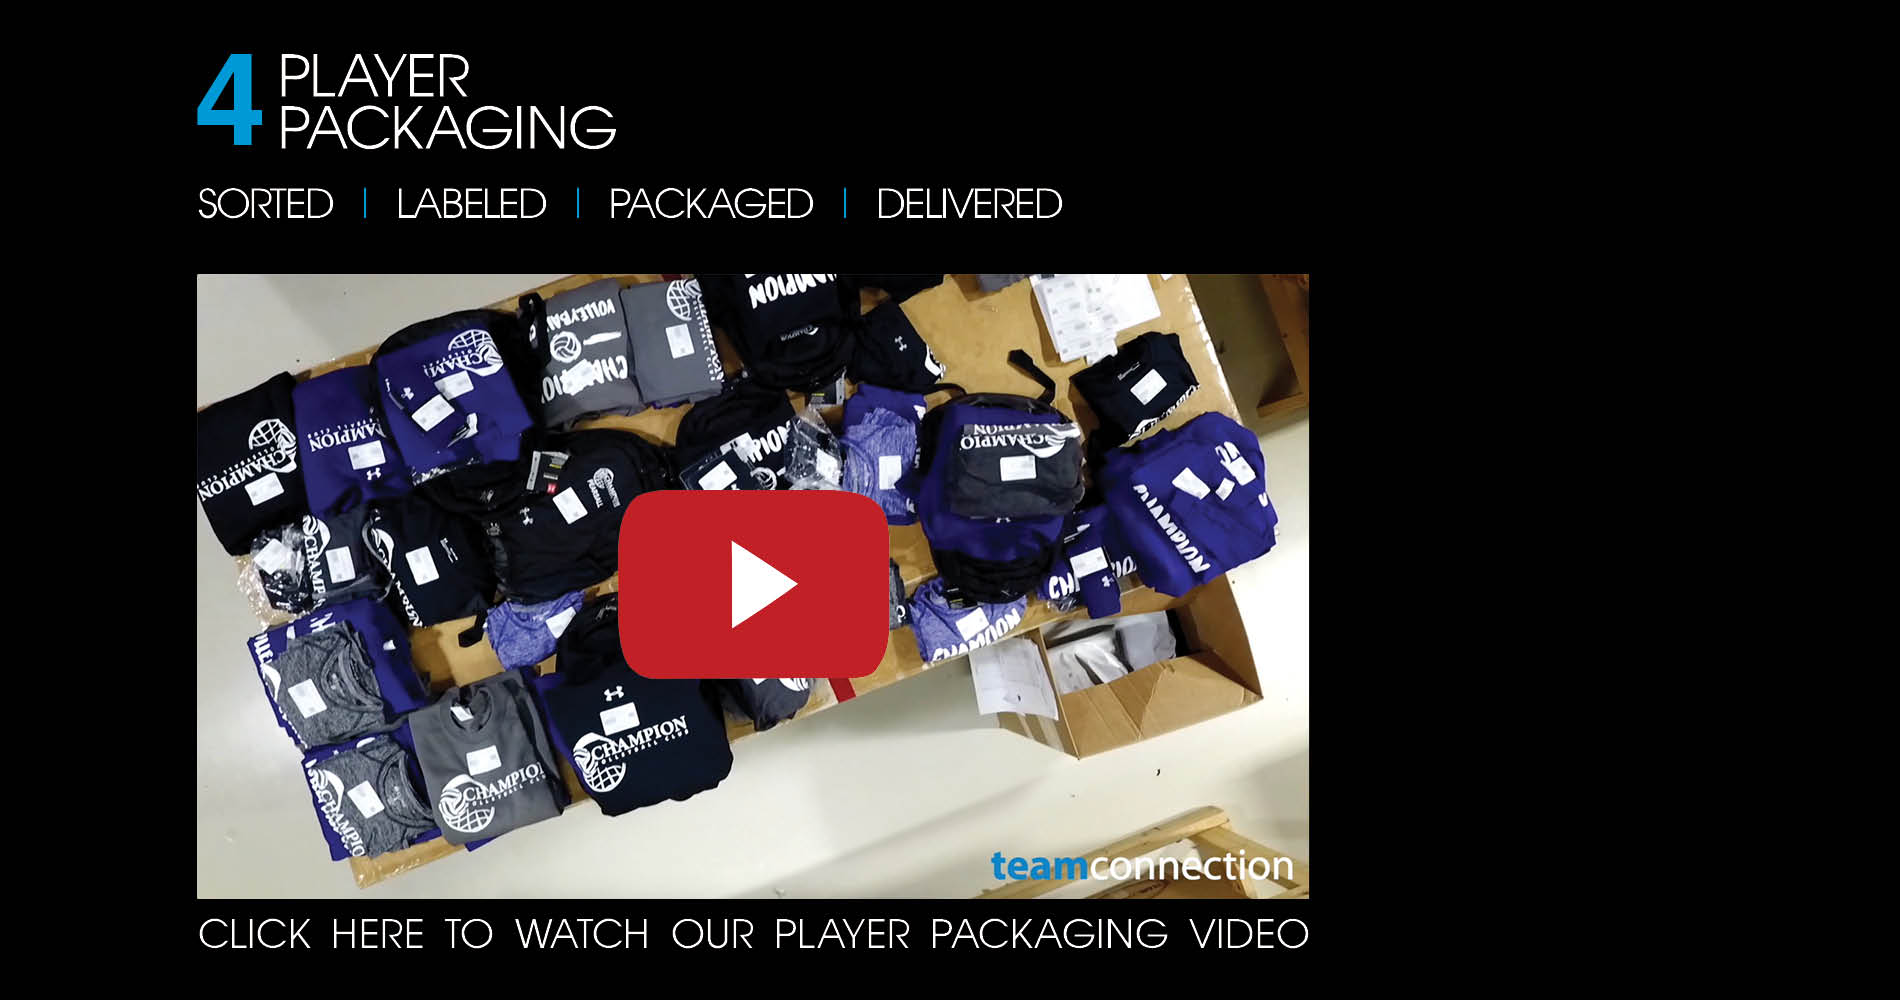 Player packaging